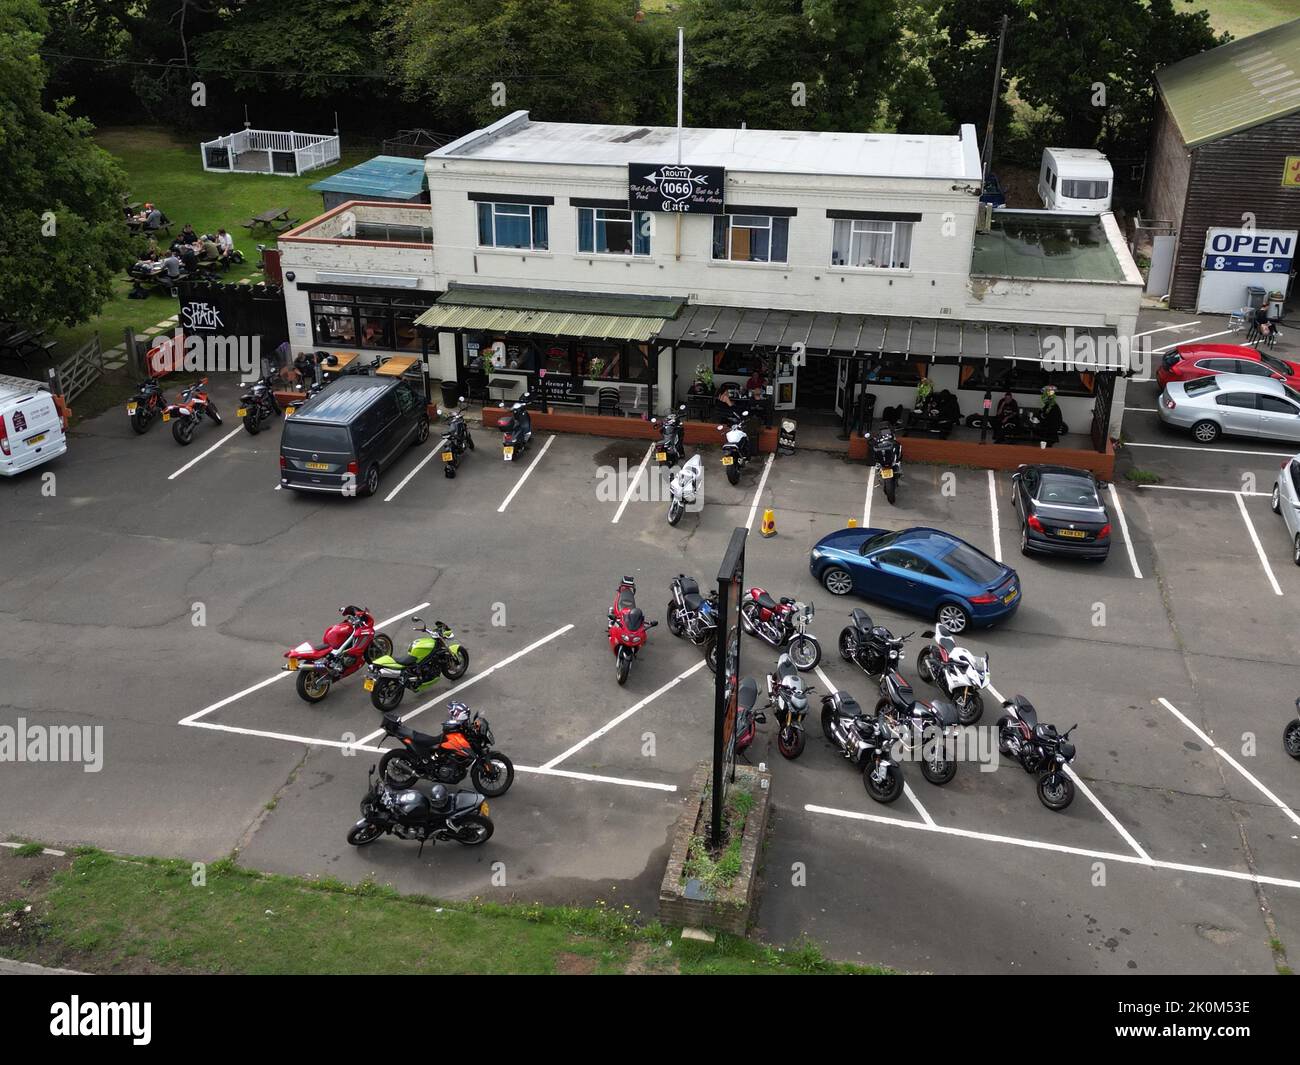 Beautiful view of the Route 1066 Cafe in Robertsbridge, East Sussex full of riders and tourists Stock Photo